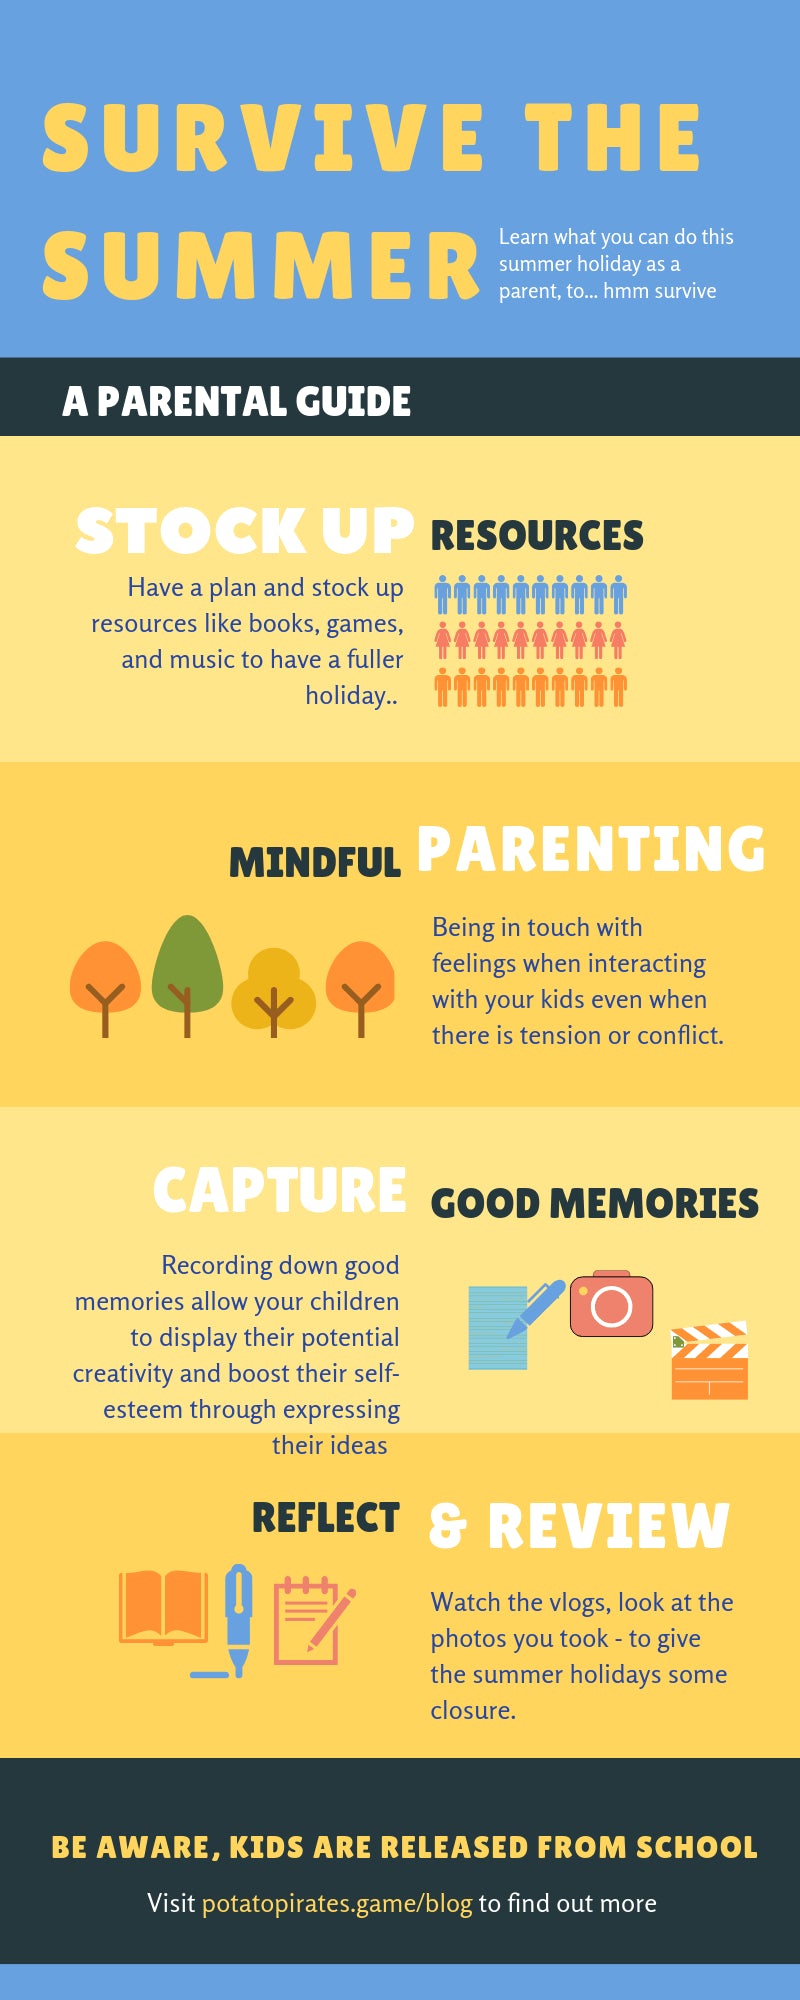 A Guide For Parents To Survive The Summer Holidays infographic